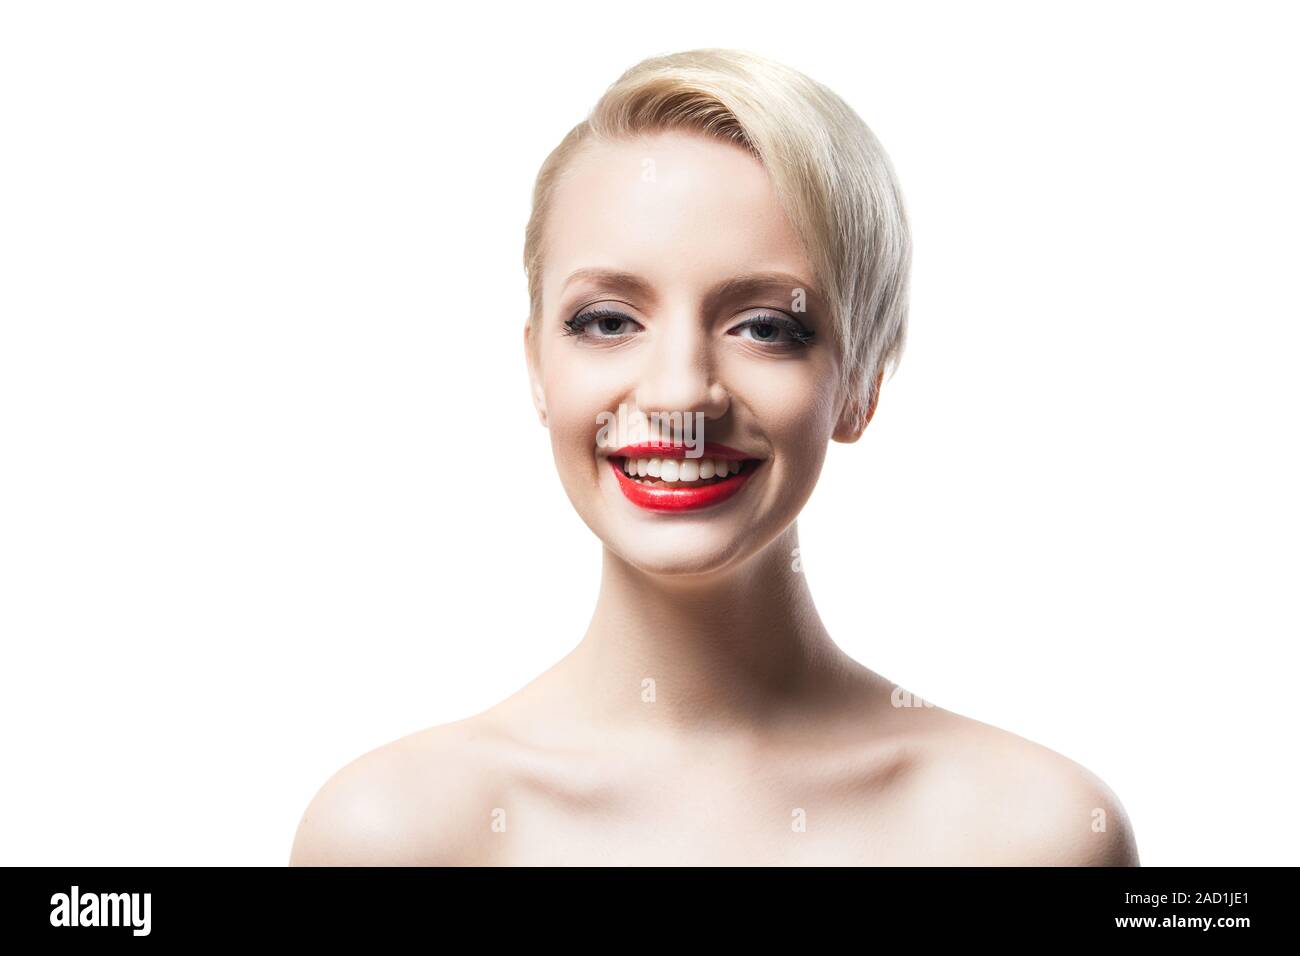 Cheerful blonde-haired model with red lips smiling at camera Stock Photo